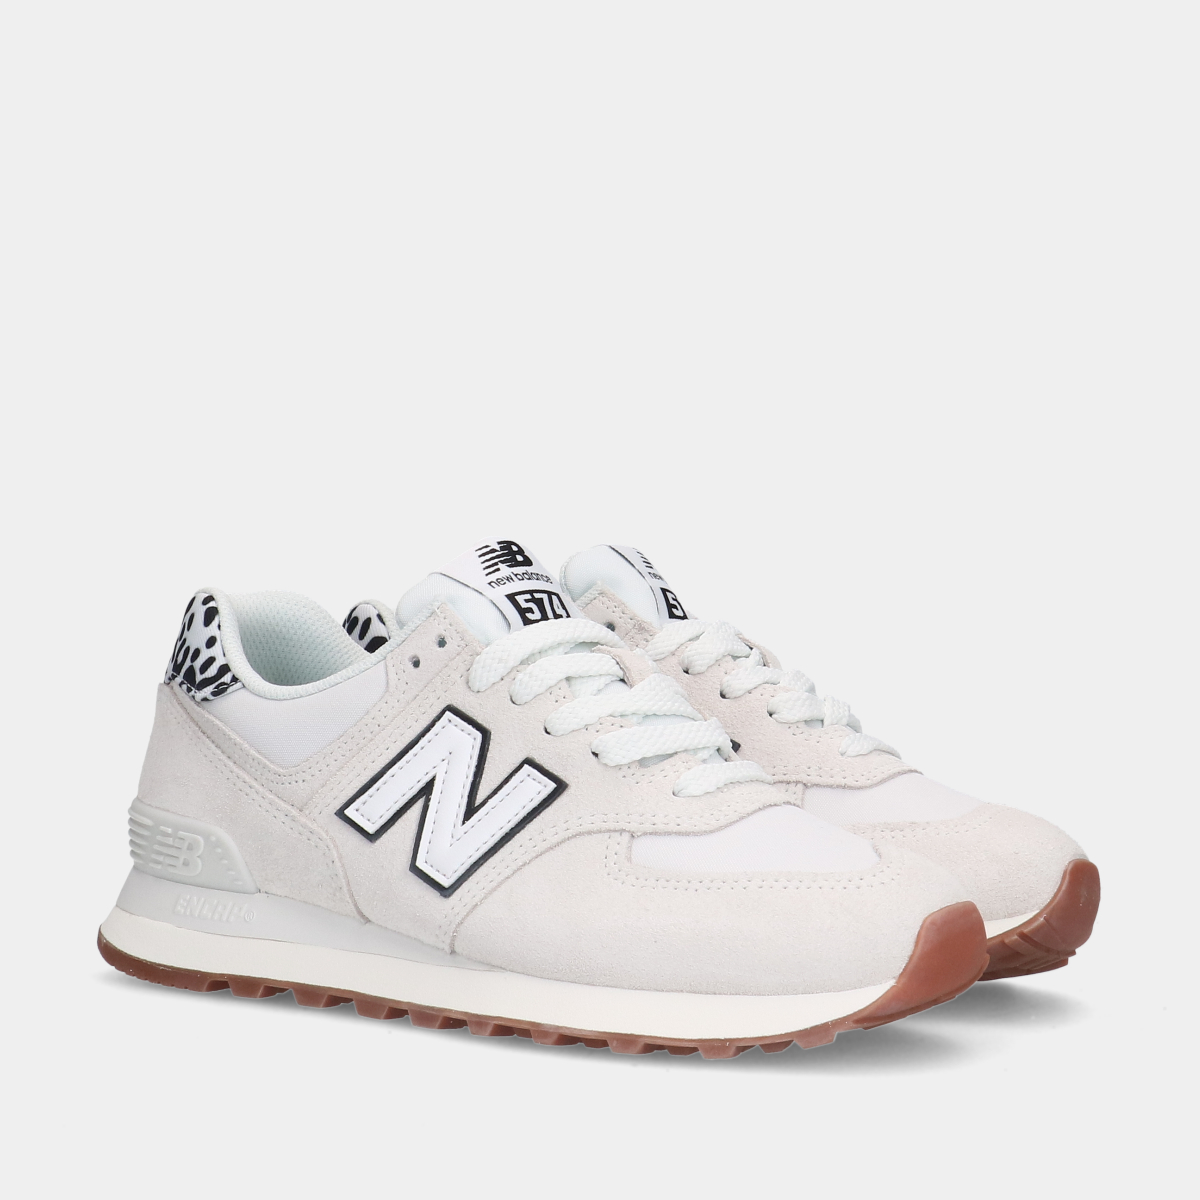 New Balance 574 Reflection dames sneakers